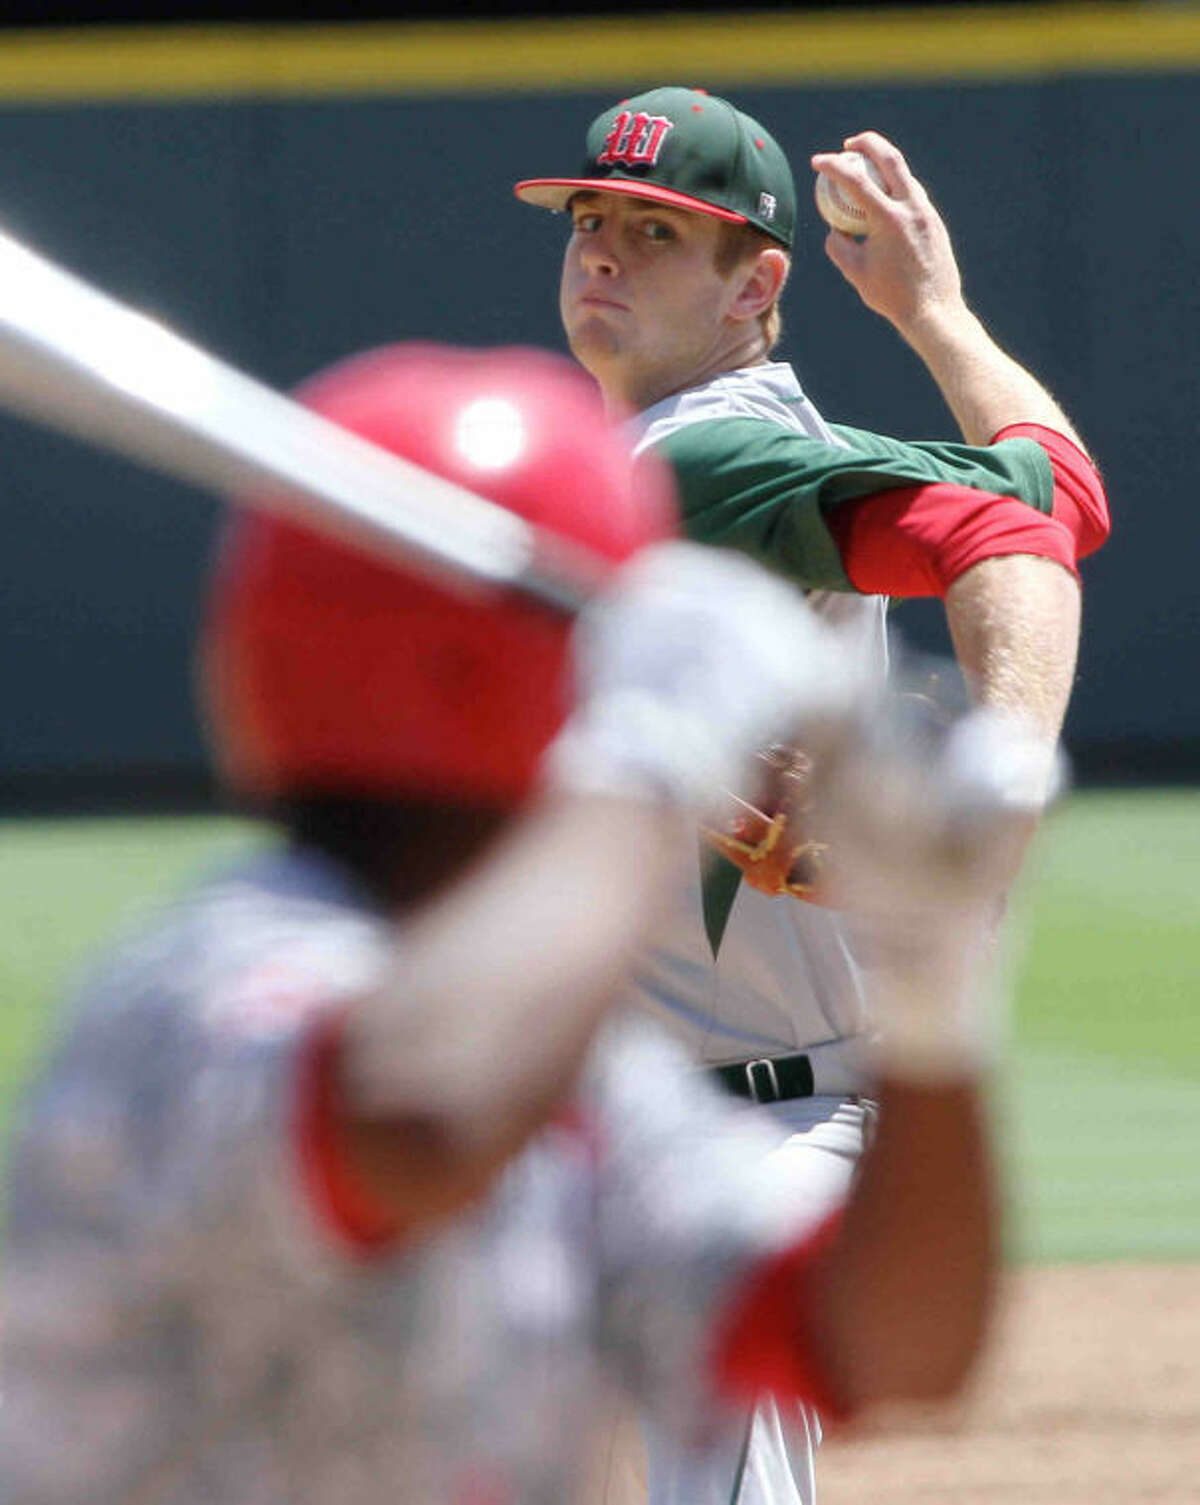 The Woodlands pitcher Carter Hope (23) throws in the first inning of the Class 5A UIL state baseball championship game on Saturday, June 8, 2013, at Dell Diamond in Round Rock, Texas. The Woodlands defeated Fort Bend Dulles 9-5. Go to HCNPics.com to view and purchase this photo, and others like it.